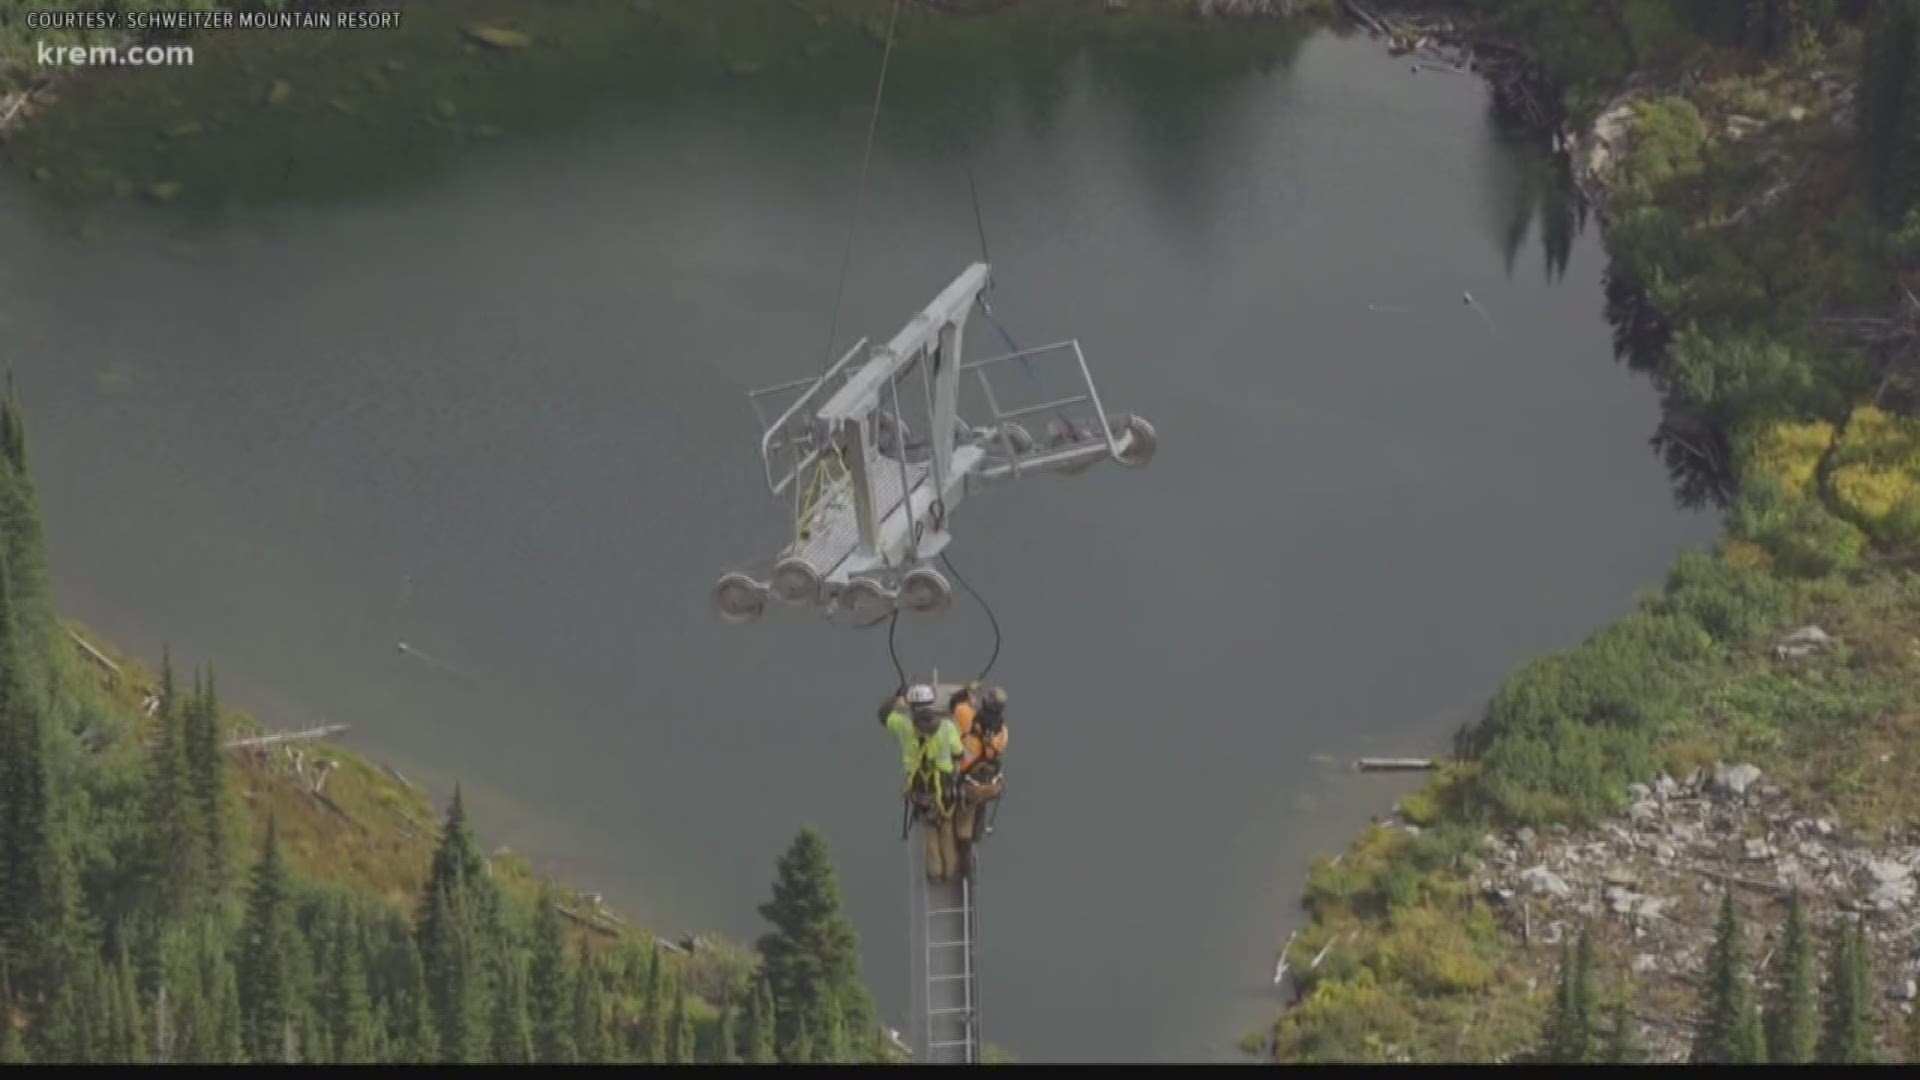 KREM's Taylor Viydo went to Schweitzer Mountain as crews installed new chair lifts. The lifts were installed using a helicopter to replace a 50 year old lift.